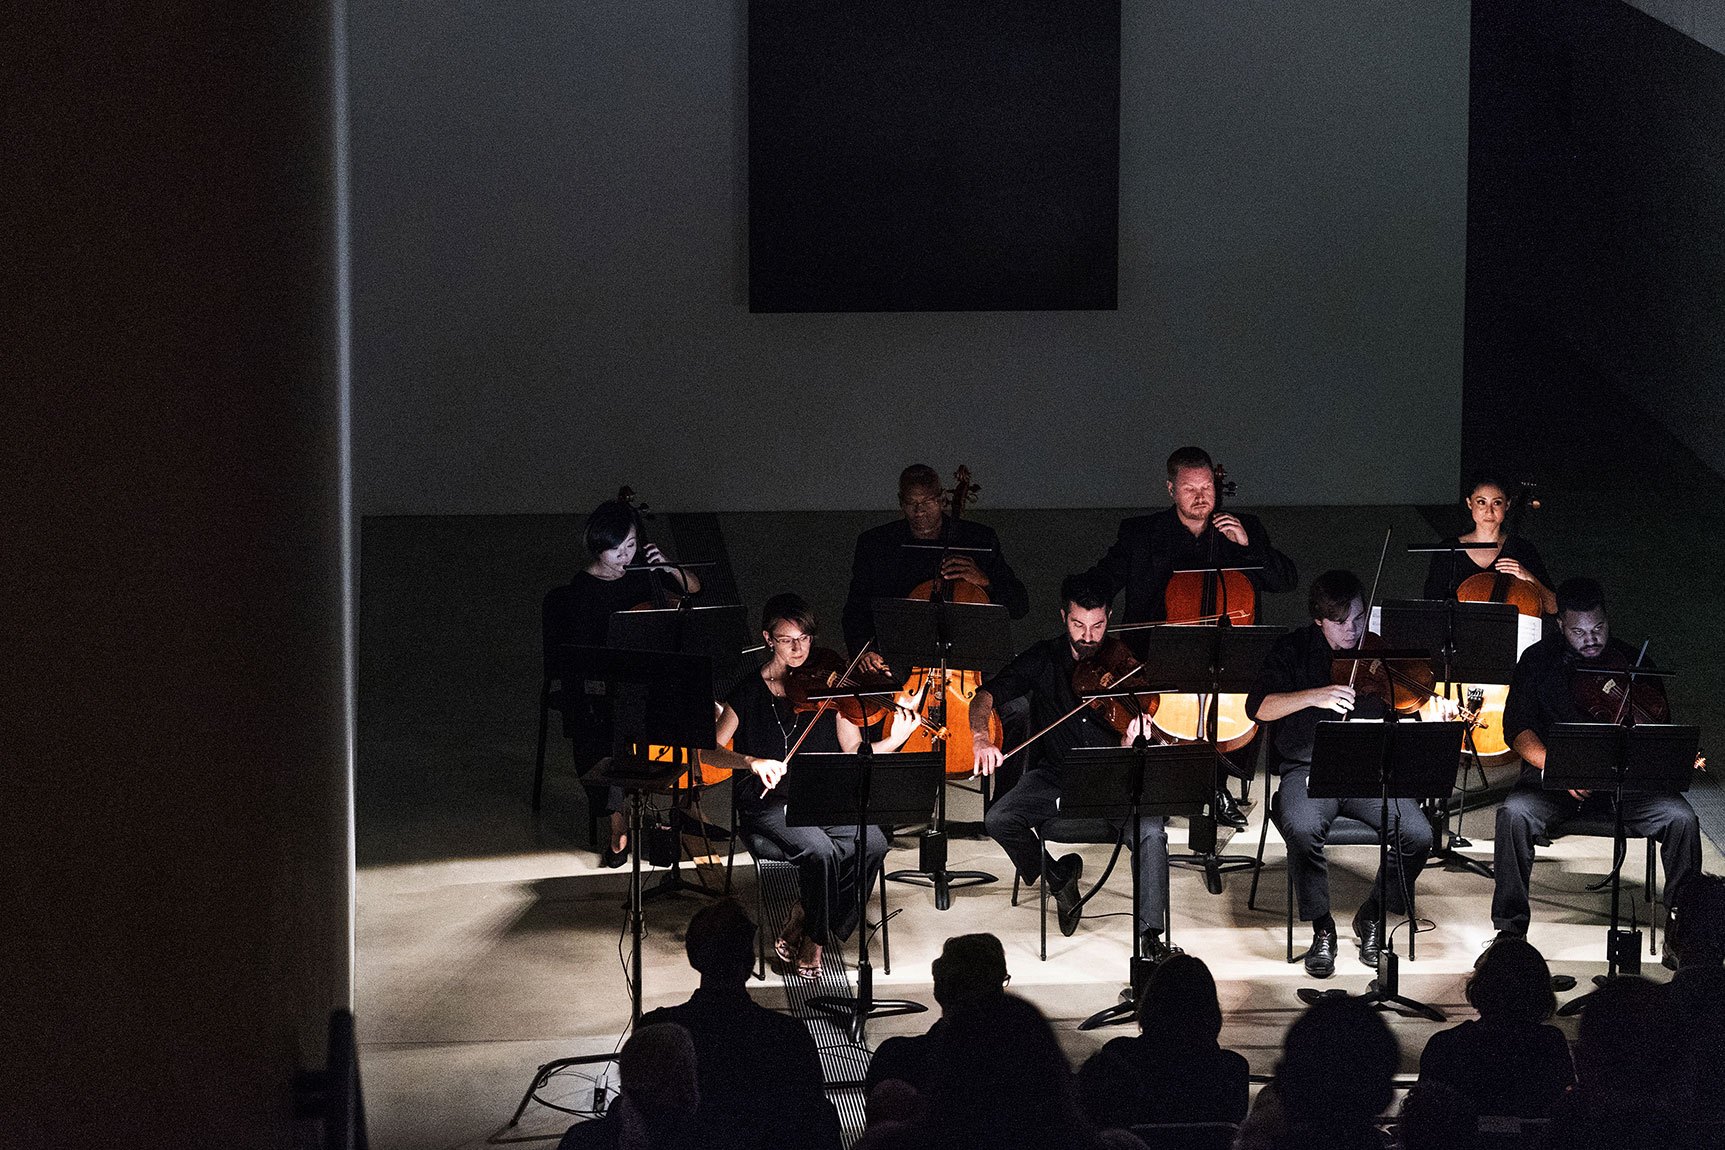 A view from the audience of a string ensemble performing in the Lower Main Gallery.